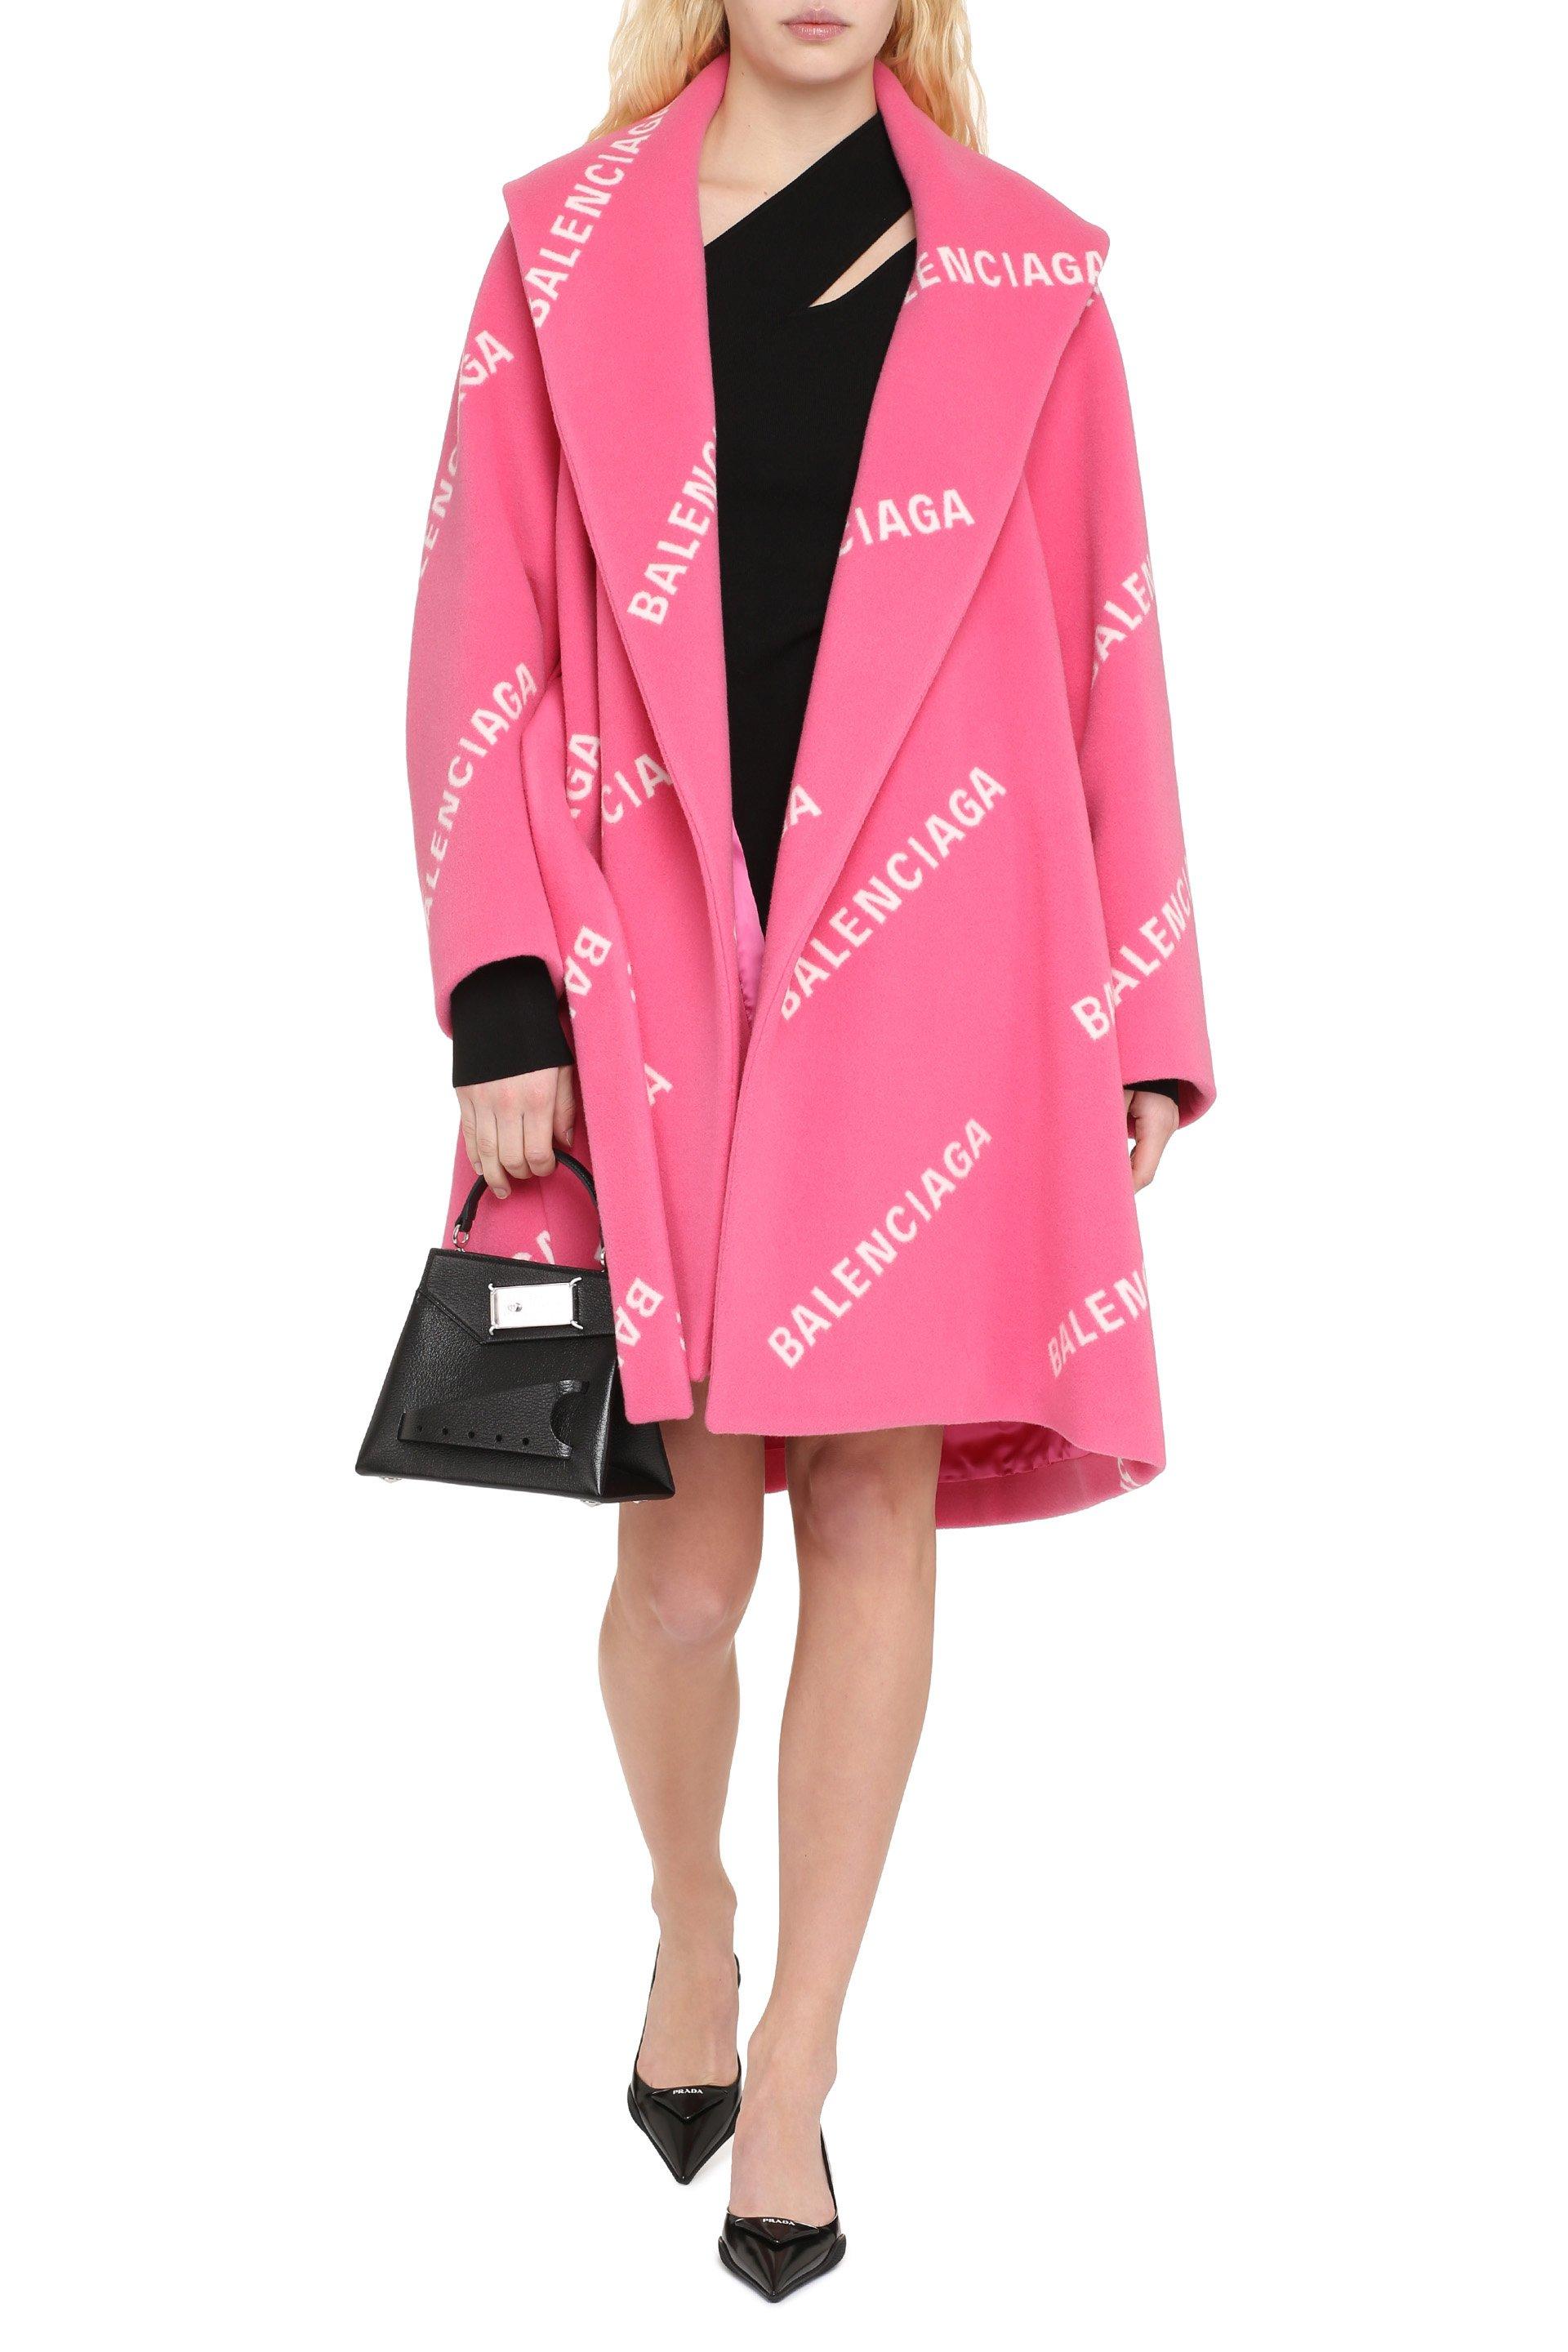 Balenciaga Printed Wool Ble in Pink | Lyst